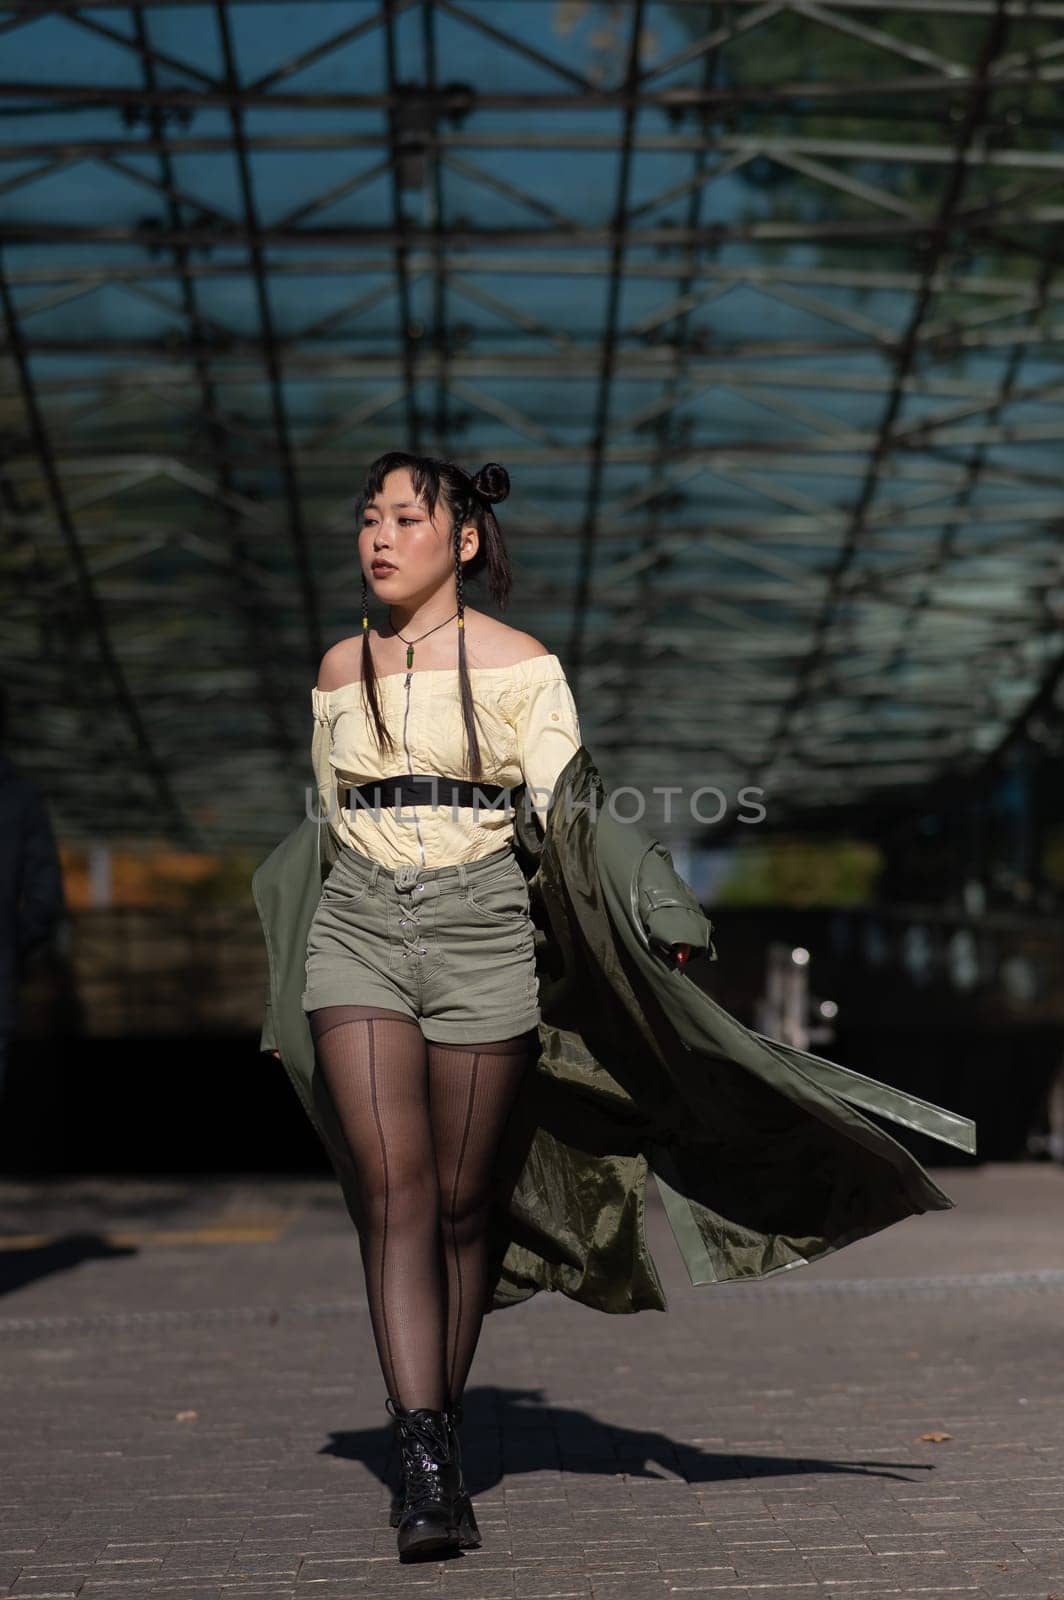 A beautiful Asian woman in shorts and a green leather coat comes out of the subway. by mrwed54